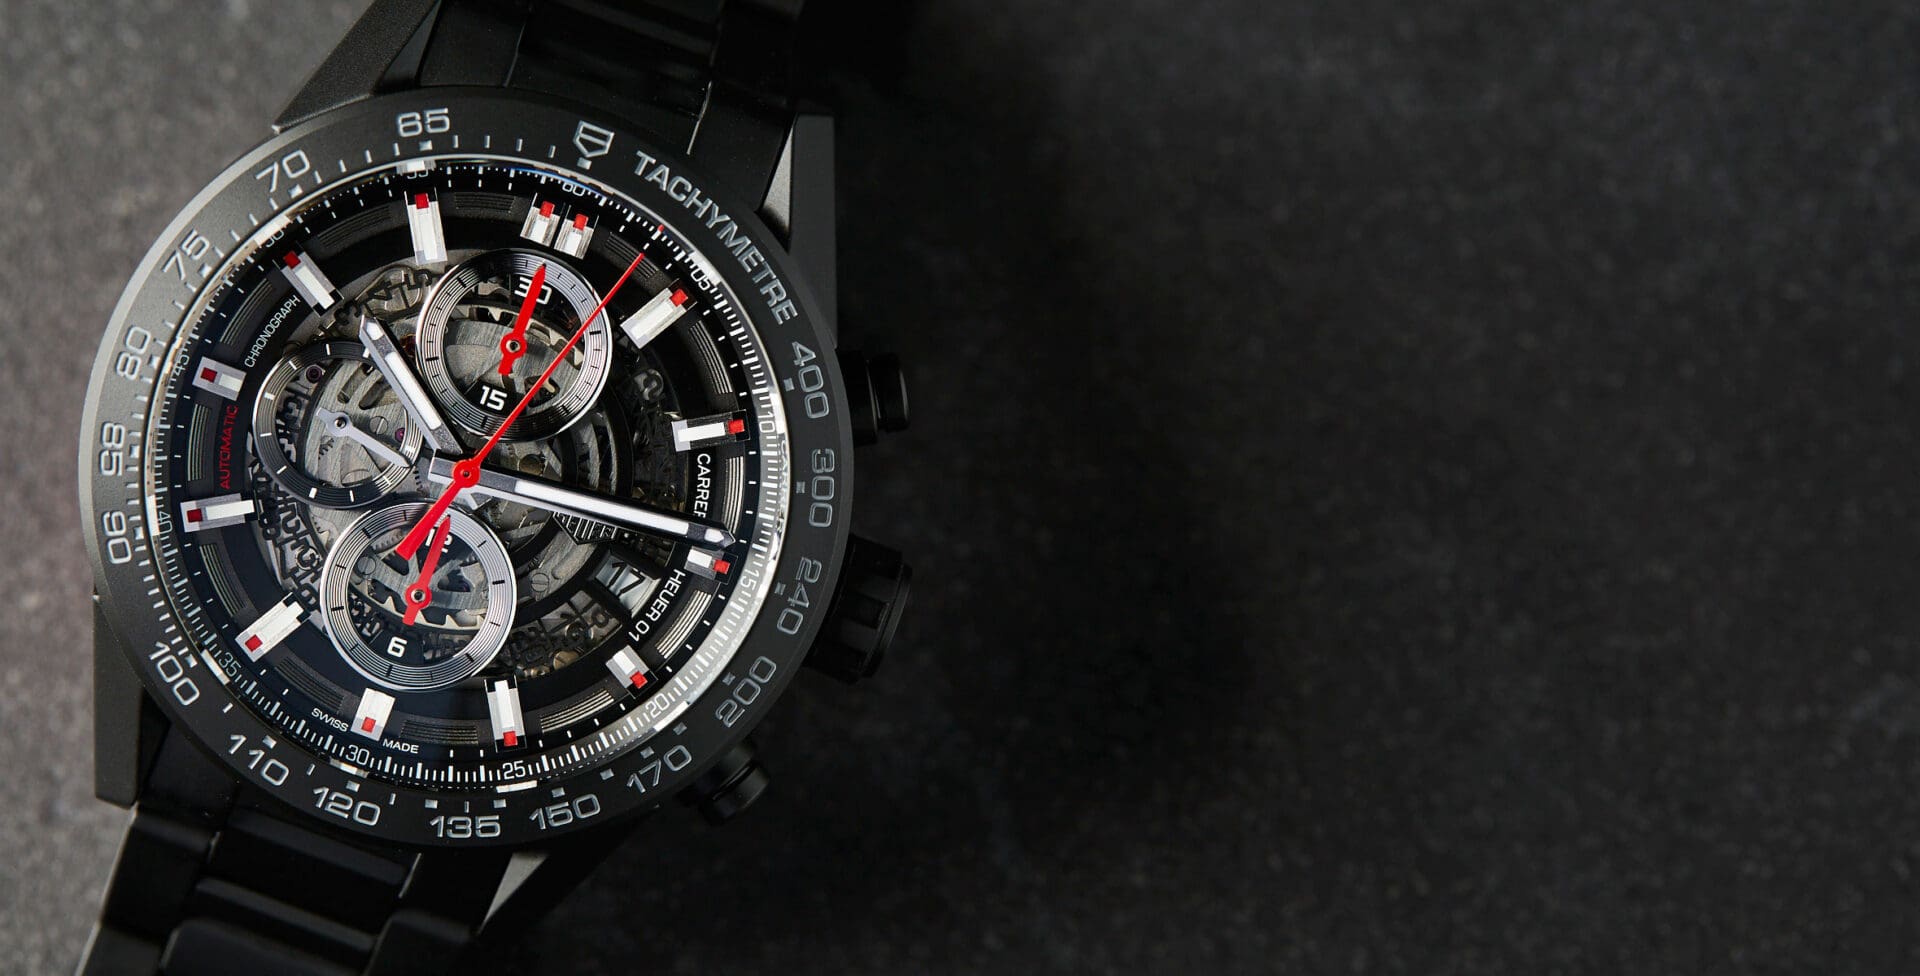 IN-DEPTH: Smart and stealthy – the TAG Heuer Carrera Heuer 01 43mm in black ceramic